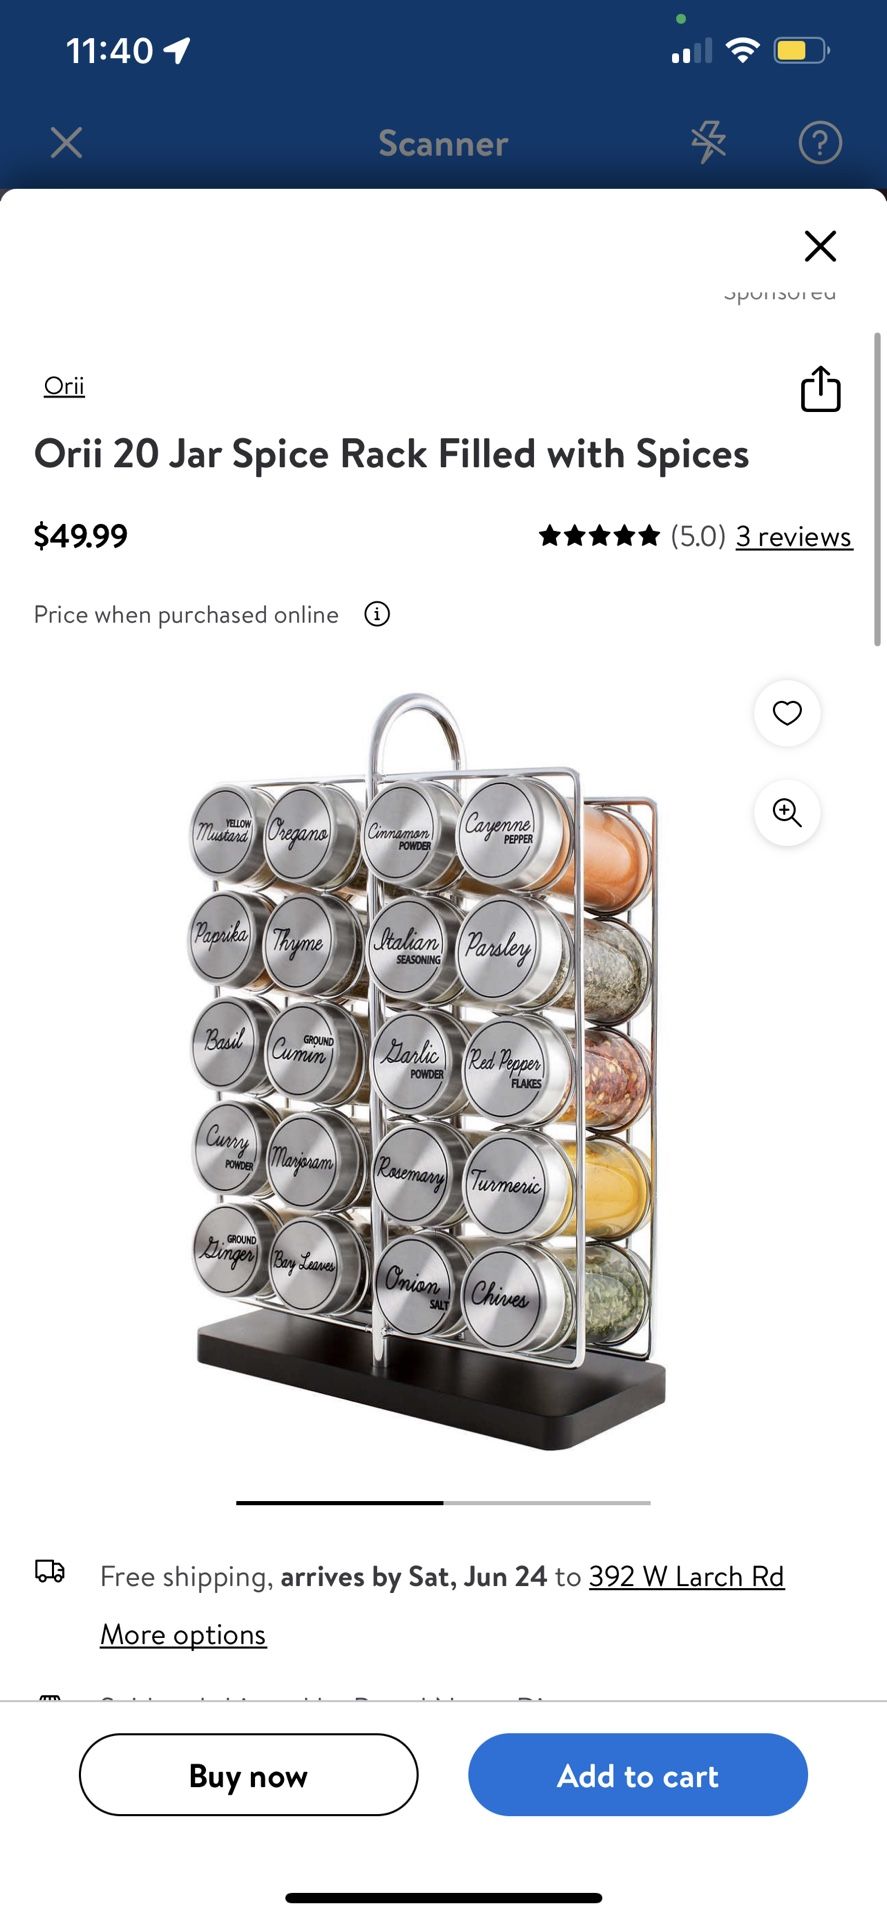 Orii 20 Jar Spice Rack Stainless Steel Filled with Spices - Standing Rack Shelf Holder & Countertop Spice Rack Tower Organizer for Kitchen Spices with